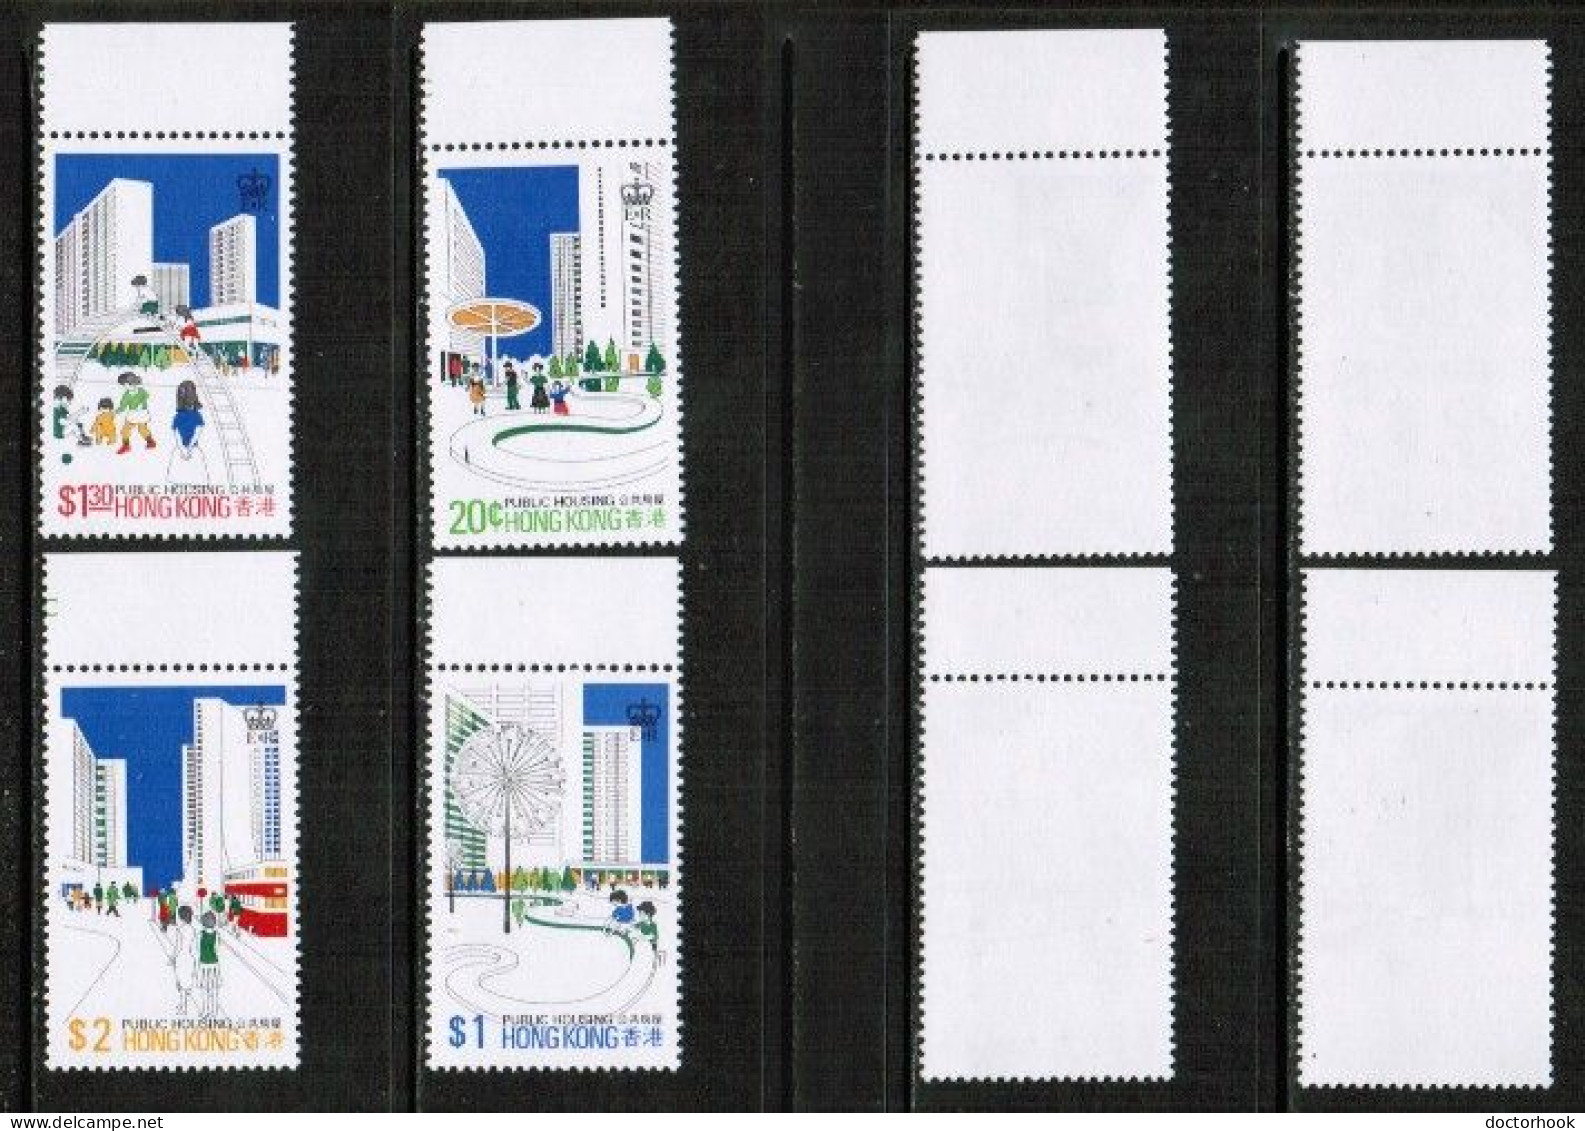 HONG KONG   Scott # 376-9** MINT NH (CONDITION AS PER SCAN) (Stamp Scan # 944-5) - Unused Stamps